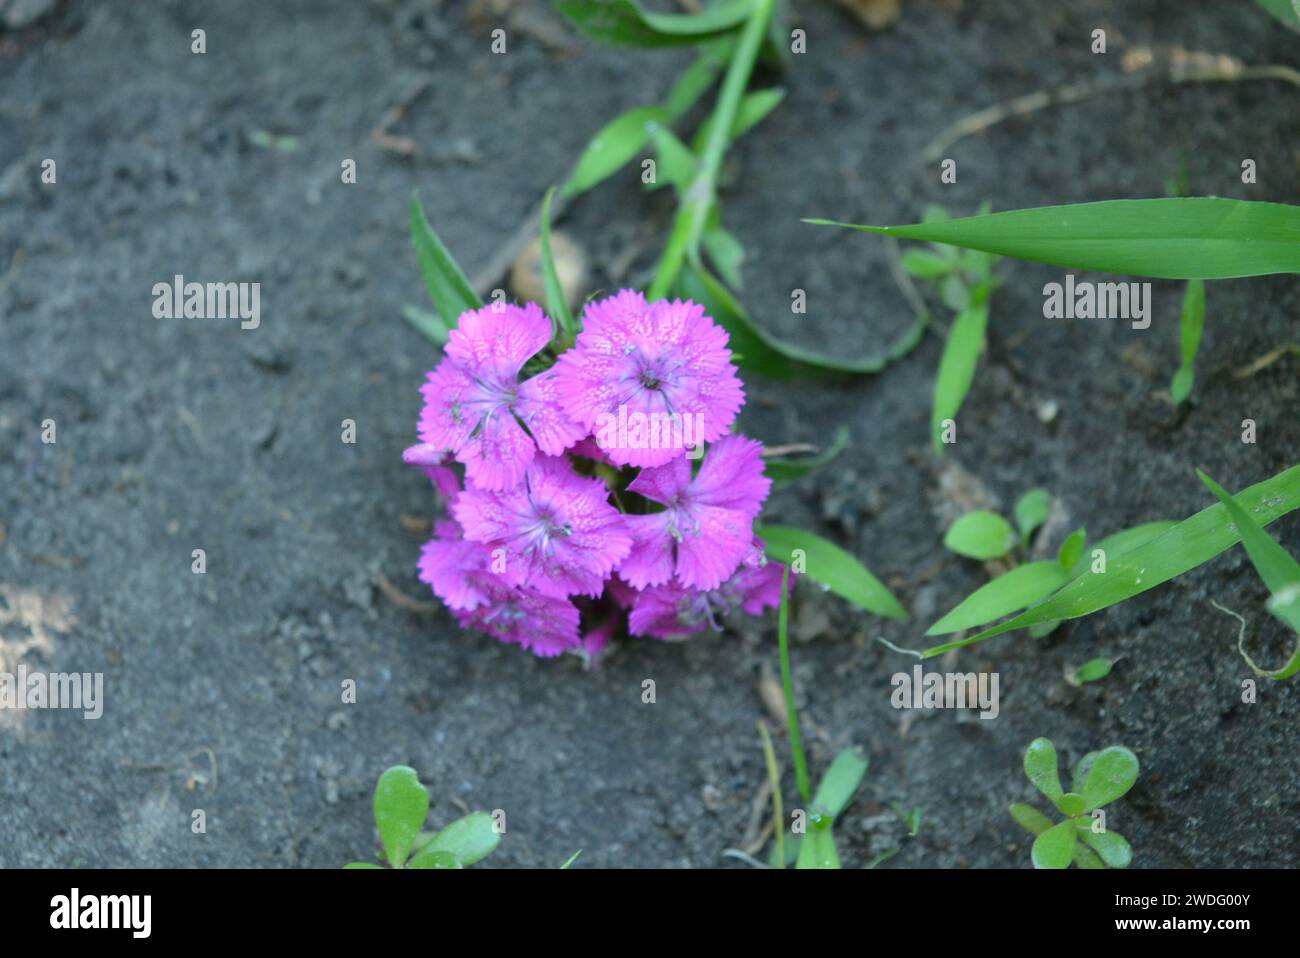 Home garden, beautiful small pink white phlox flowers growing under the rays of light. Stock Photo